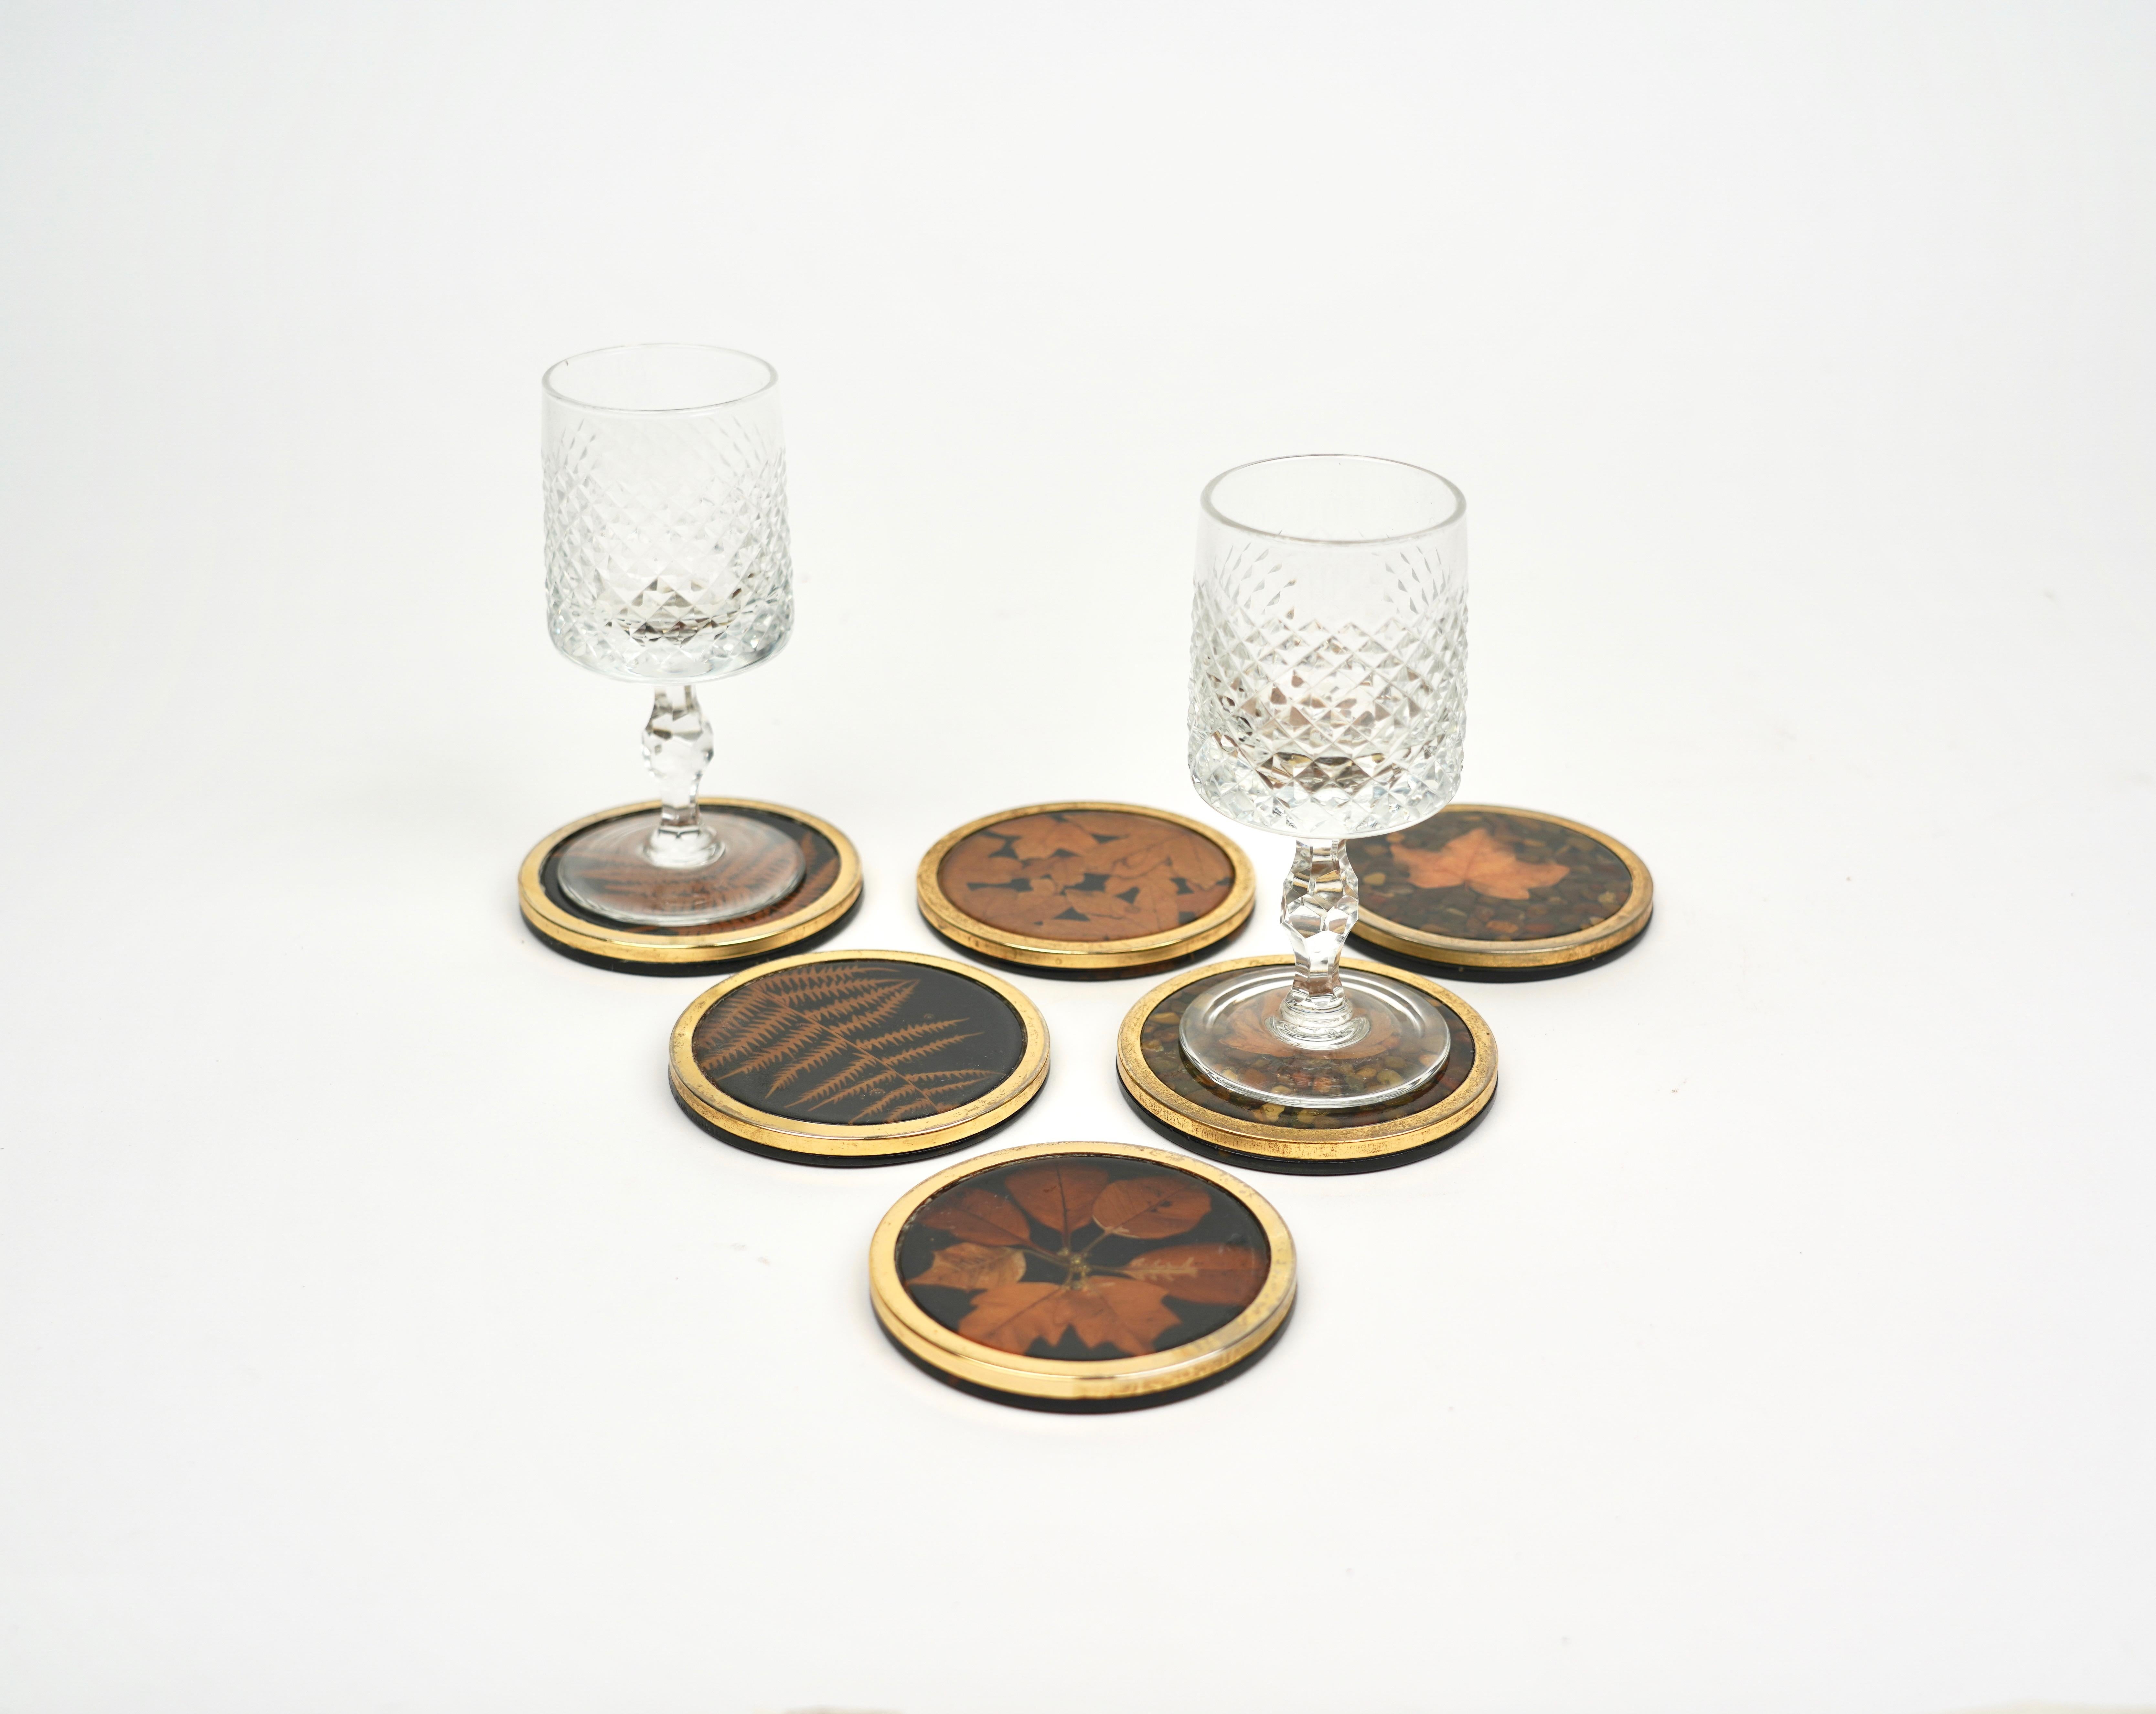 Italian Set of Six Lucite and Brass Barware Coaster with Leaves Inclusions, Italy, 1960s For Sale